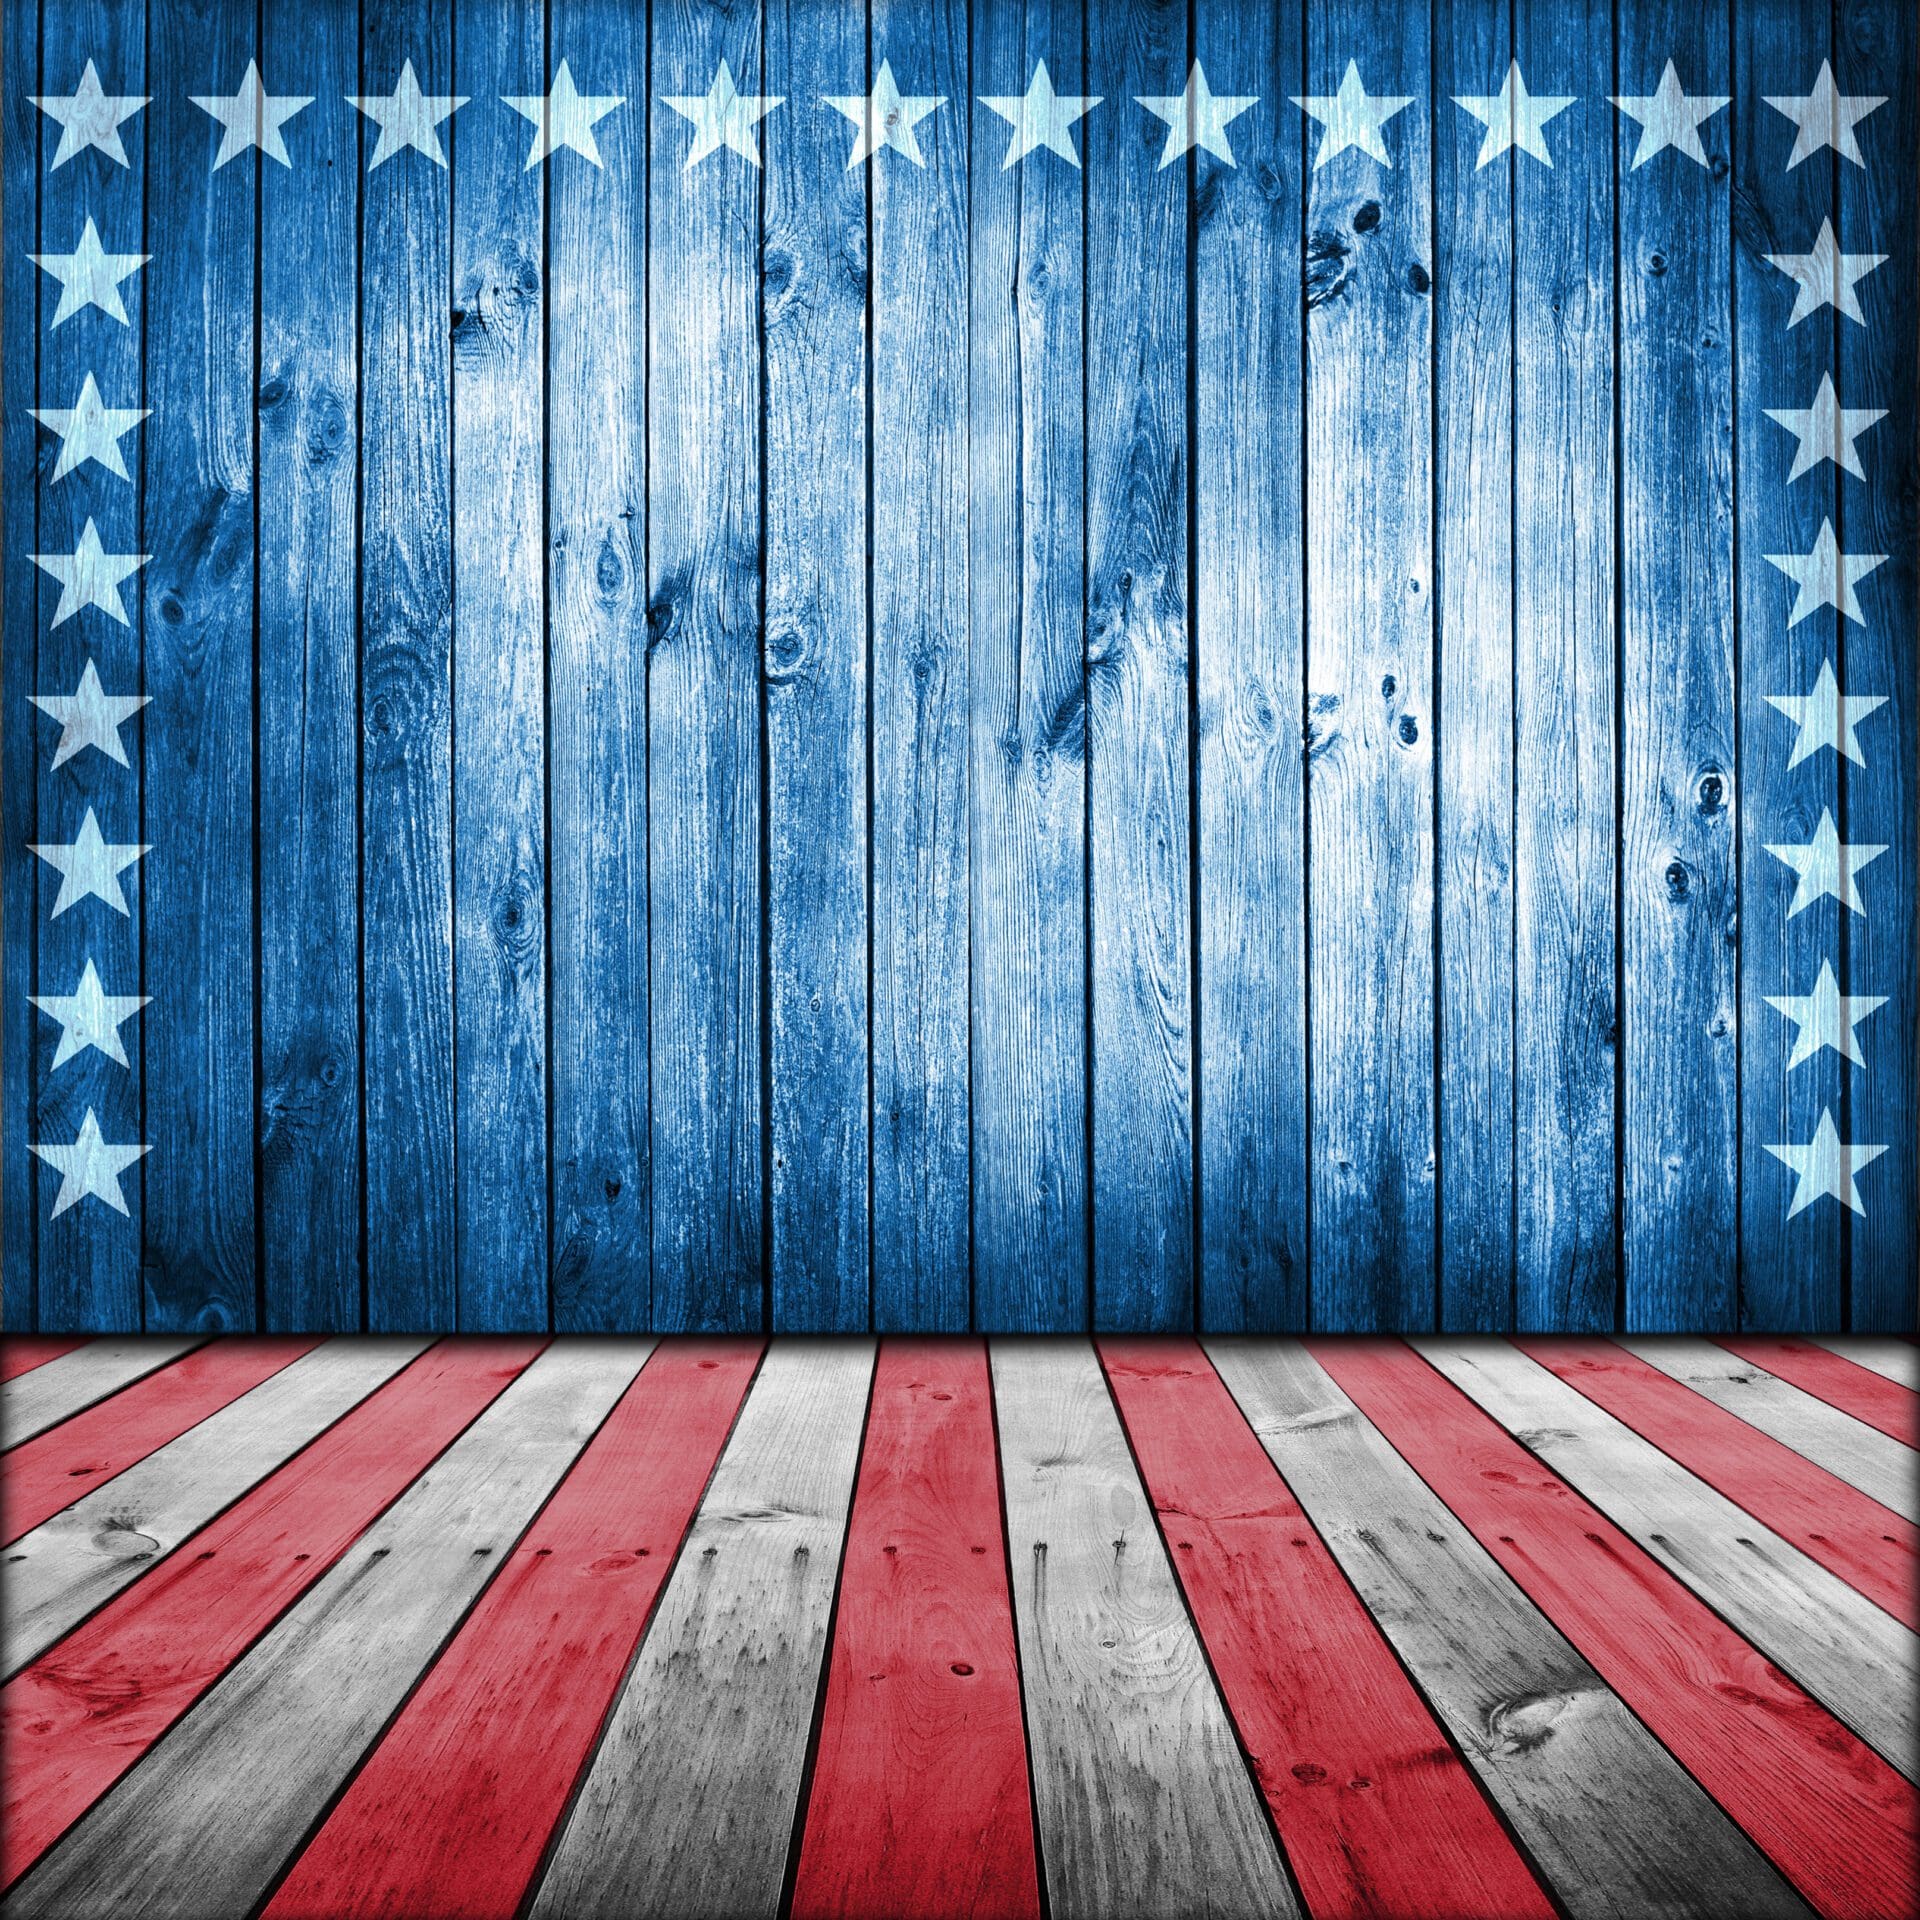 An american flag on a wooden background.